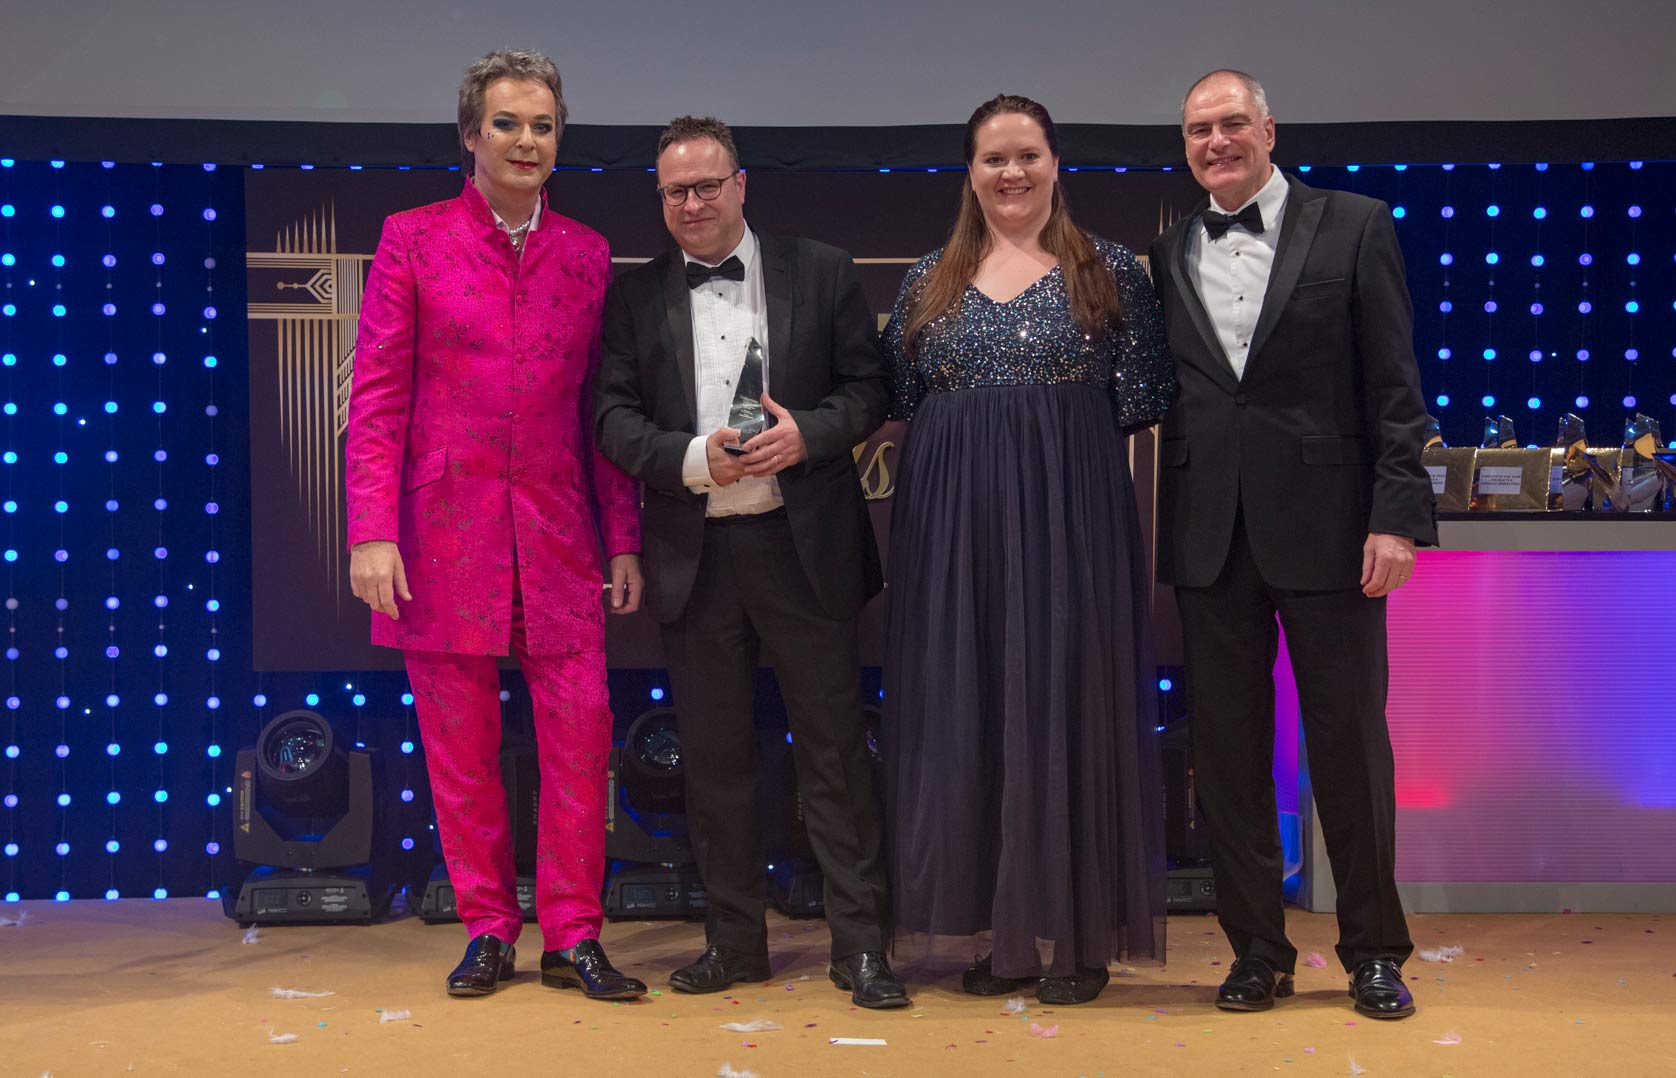 David Waddington, Land and New Homes Director at Linley & Simpson, picks up the Community Champion gold award on behalf of the agency from comic Julian Clary and sponsors